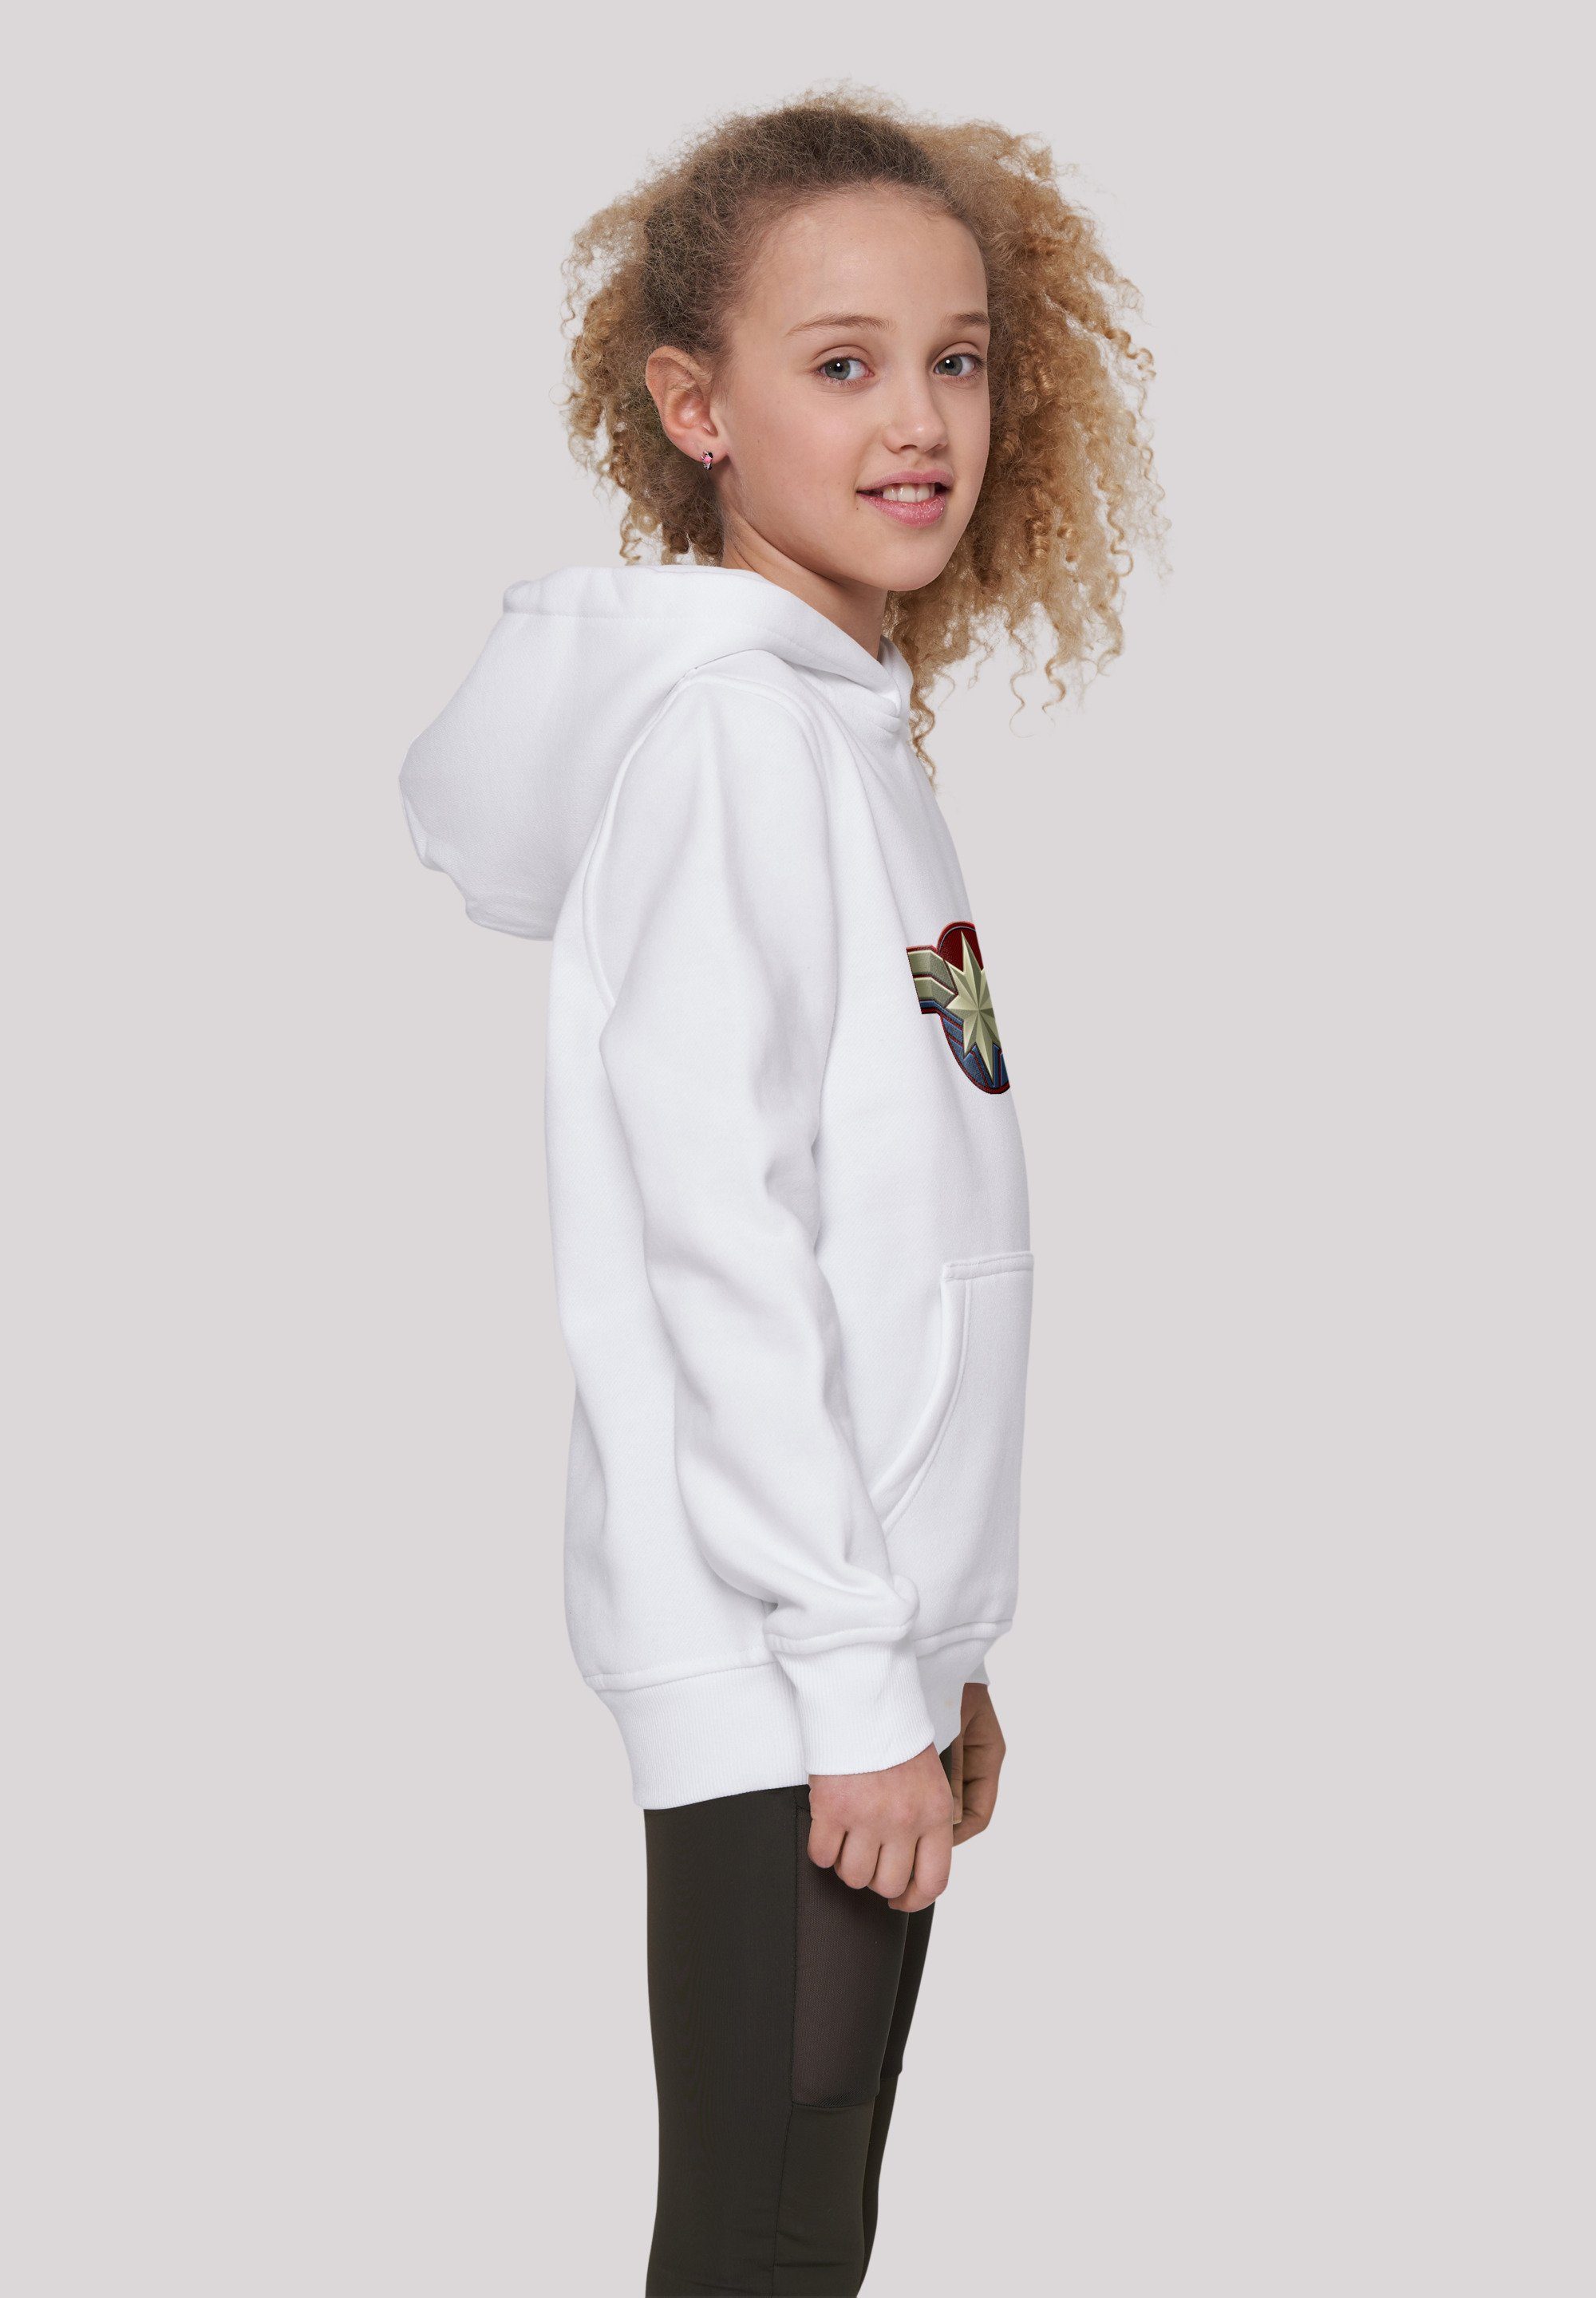 Captain Hoodie Kinder white Marvel (1-tlg) Hoody Kids F4NT4STIC Chest Emblem Basic with